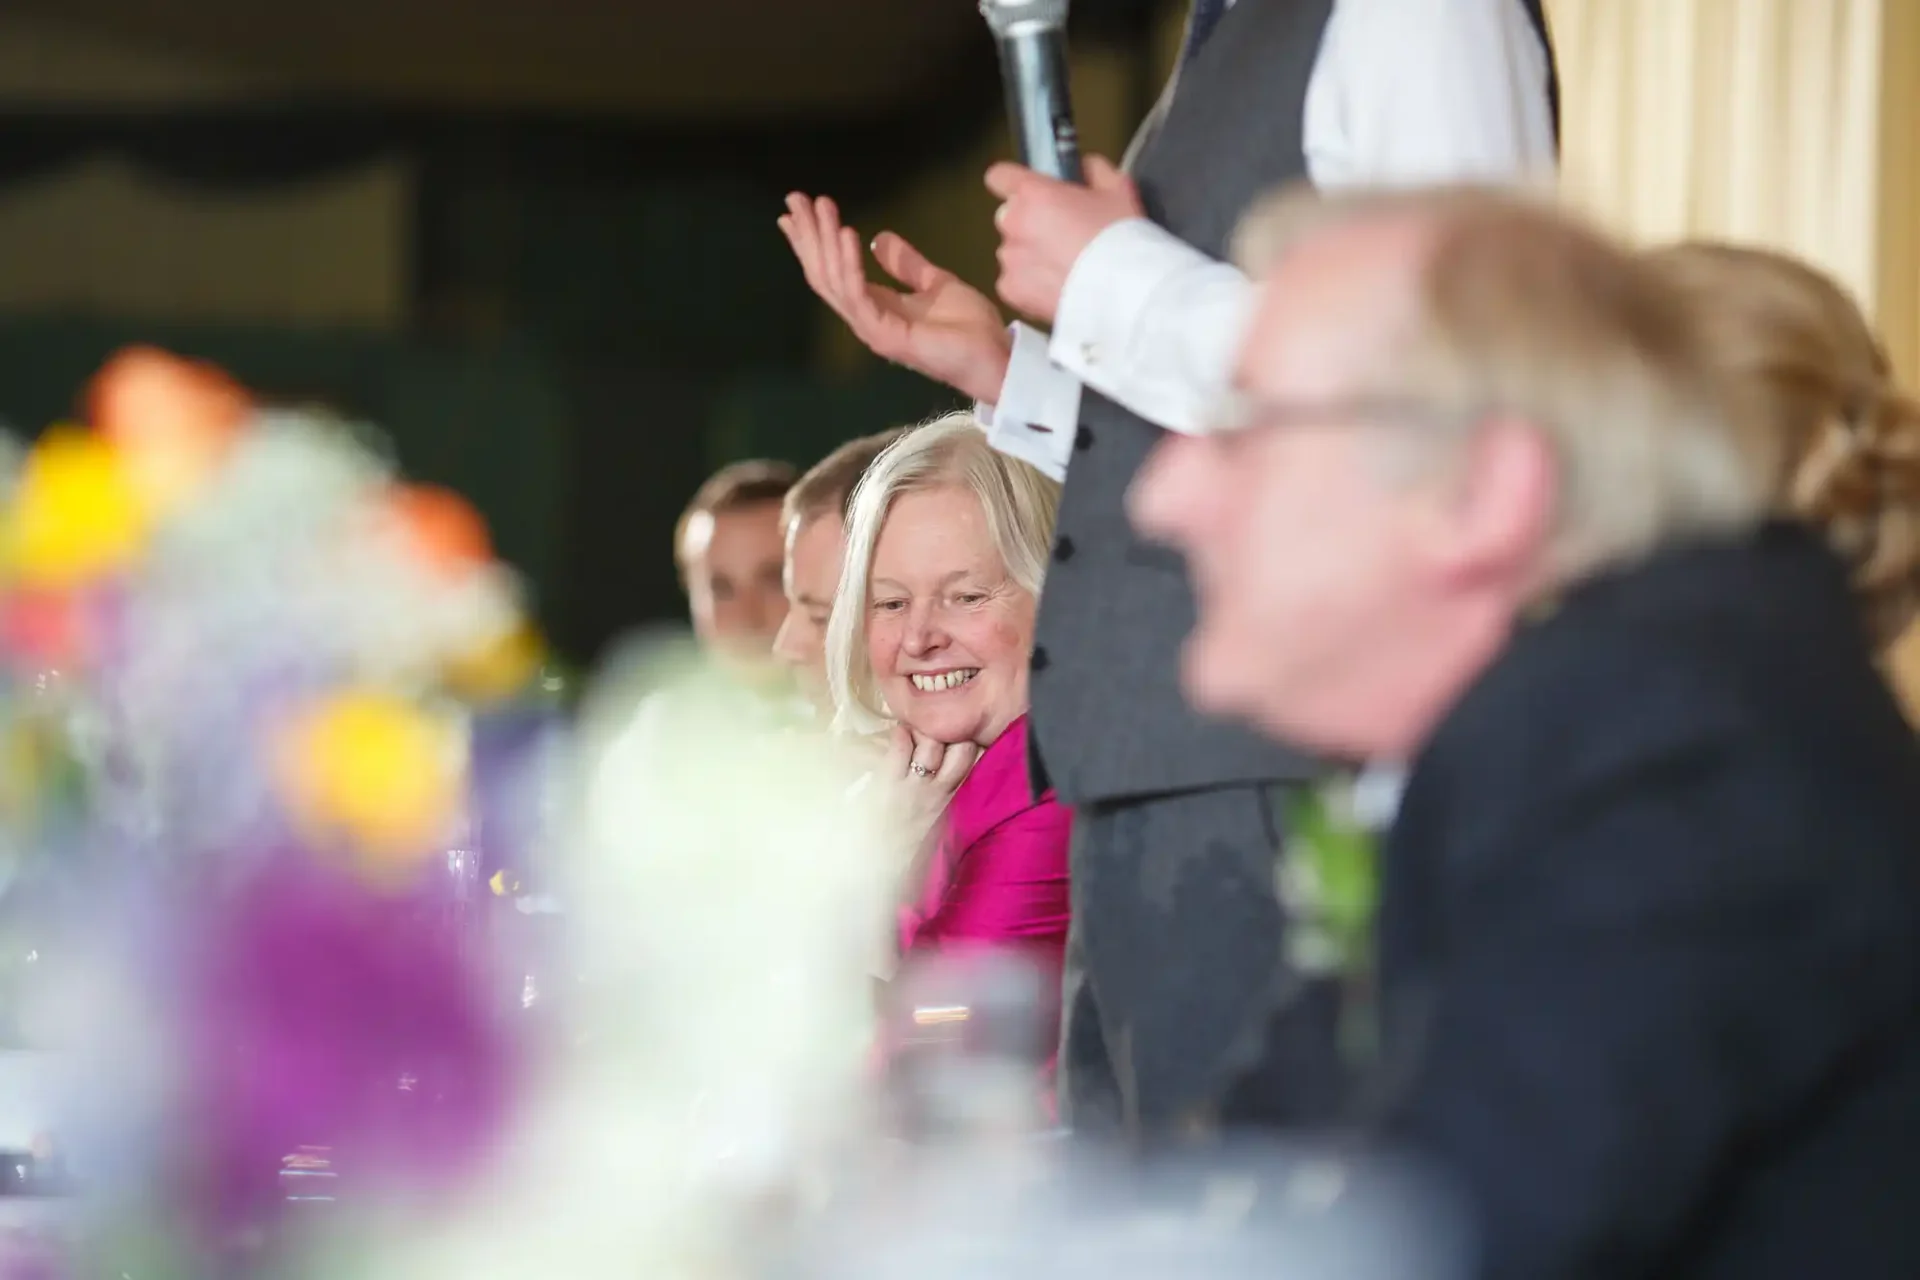 A woman smiles at a wedding reception, looking towards a man holding a microphone, with blurred floral centerpieces in the foreground.